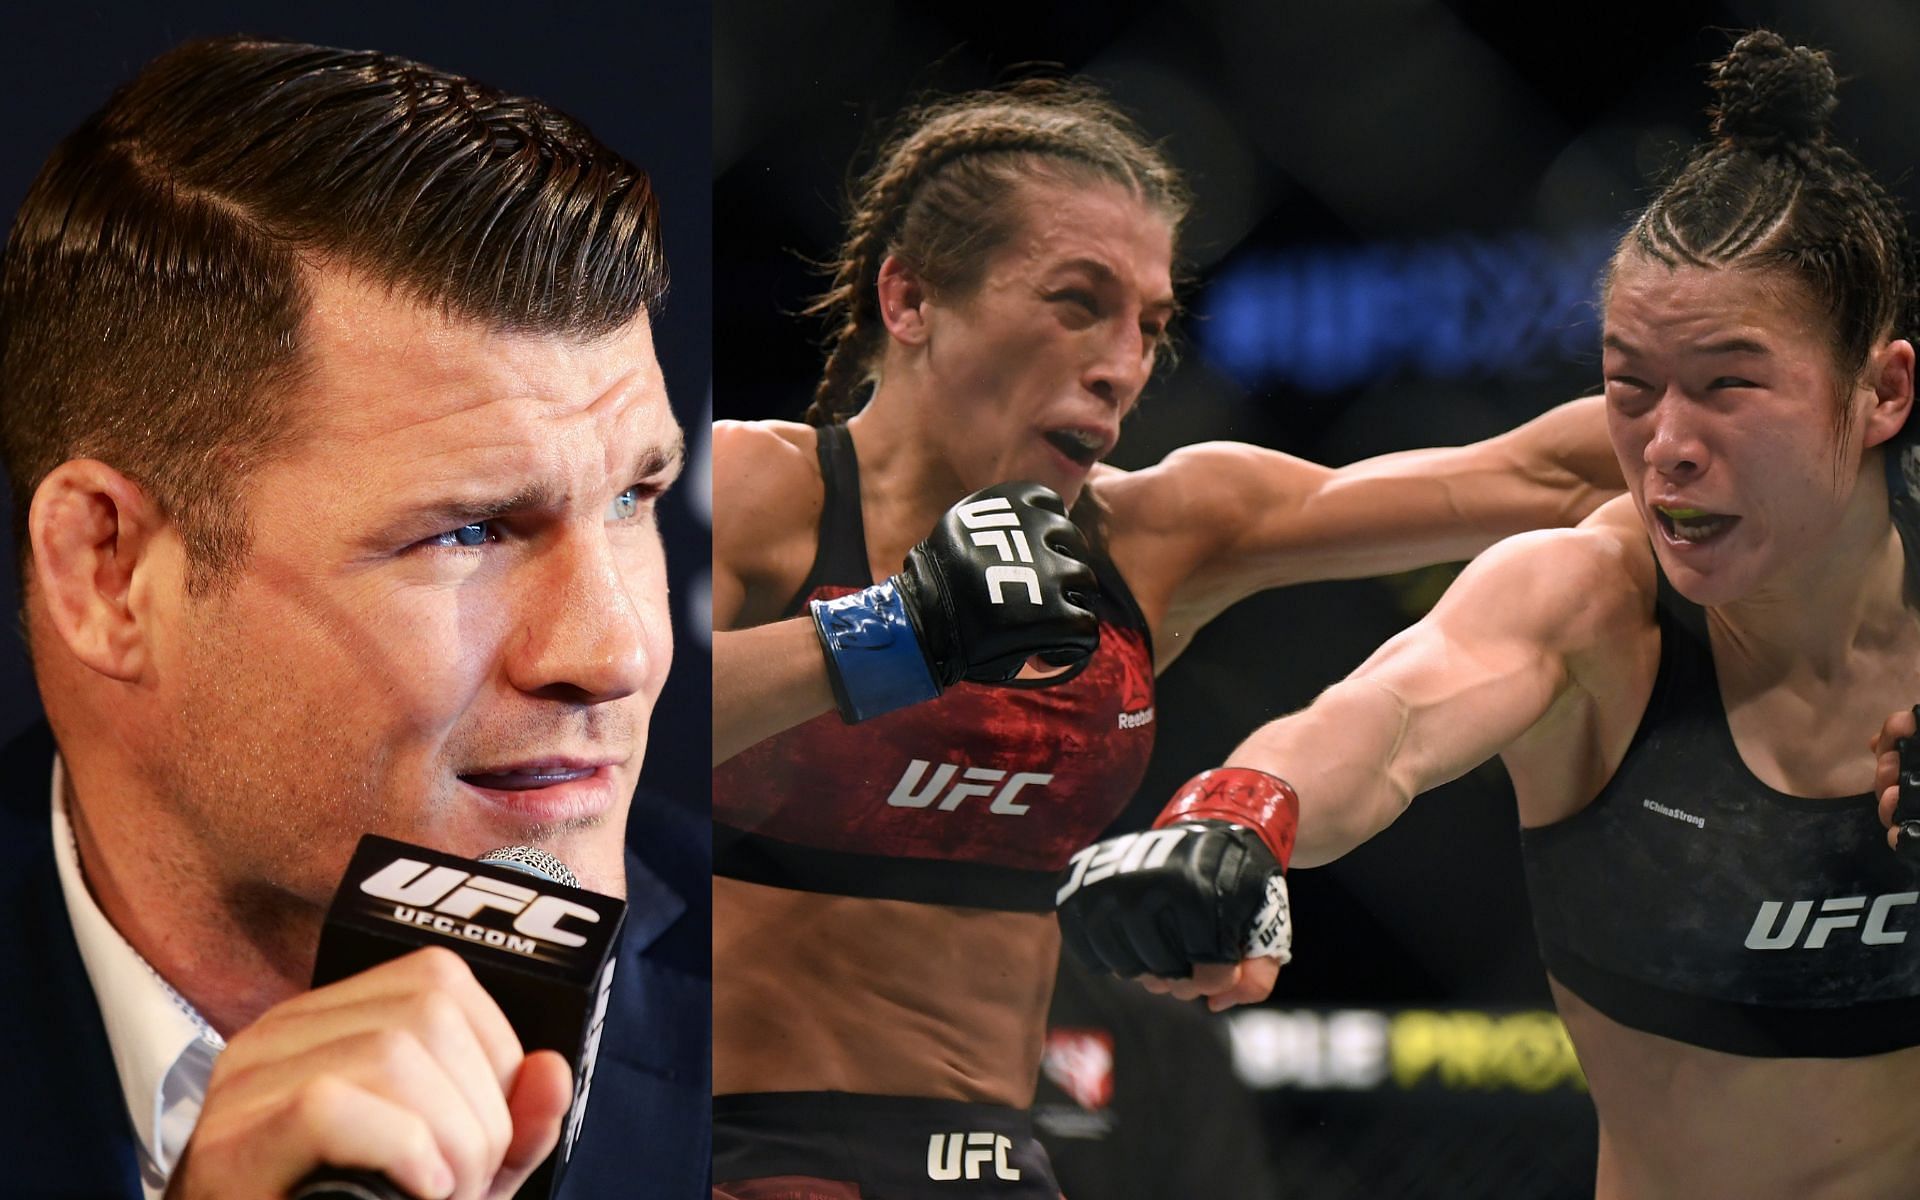 Michael Bisping (left). Joanna Jedrzejczyk &amp; Zhang Weili (right)